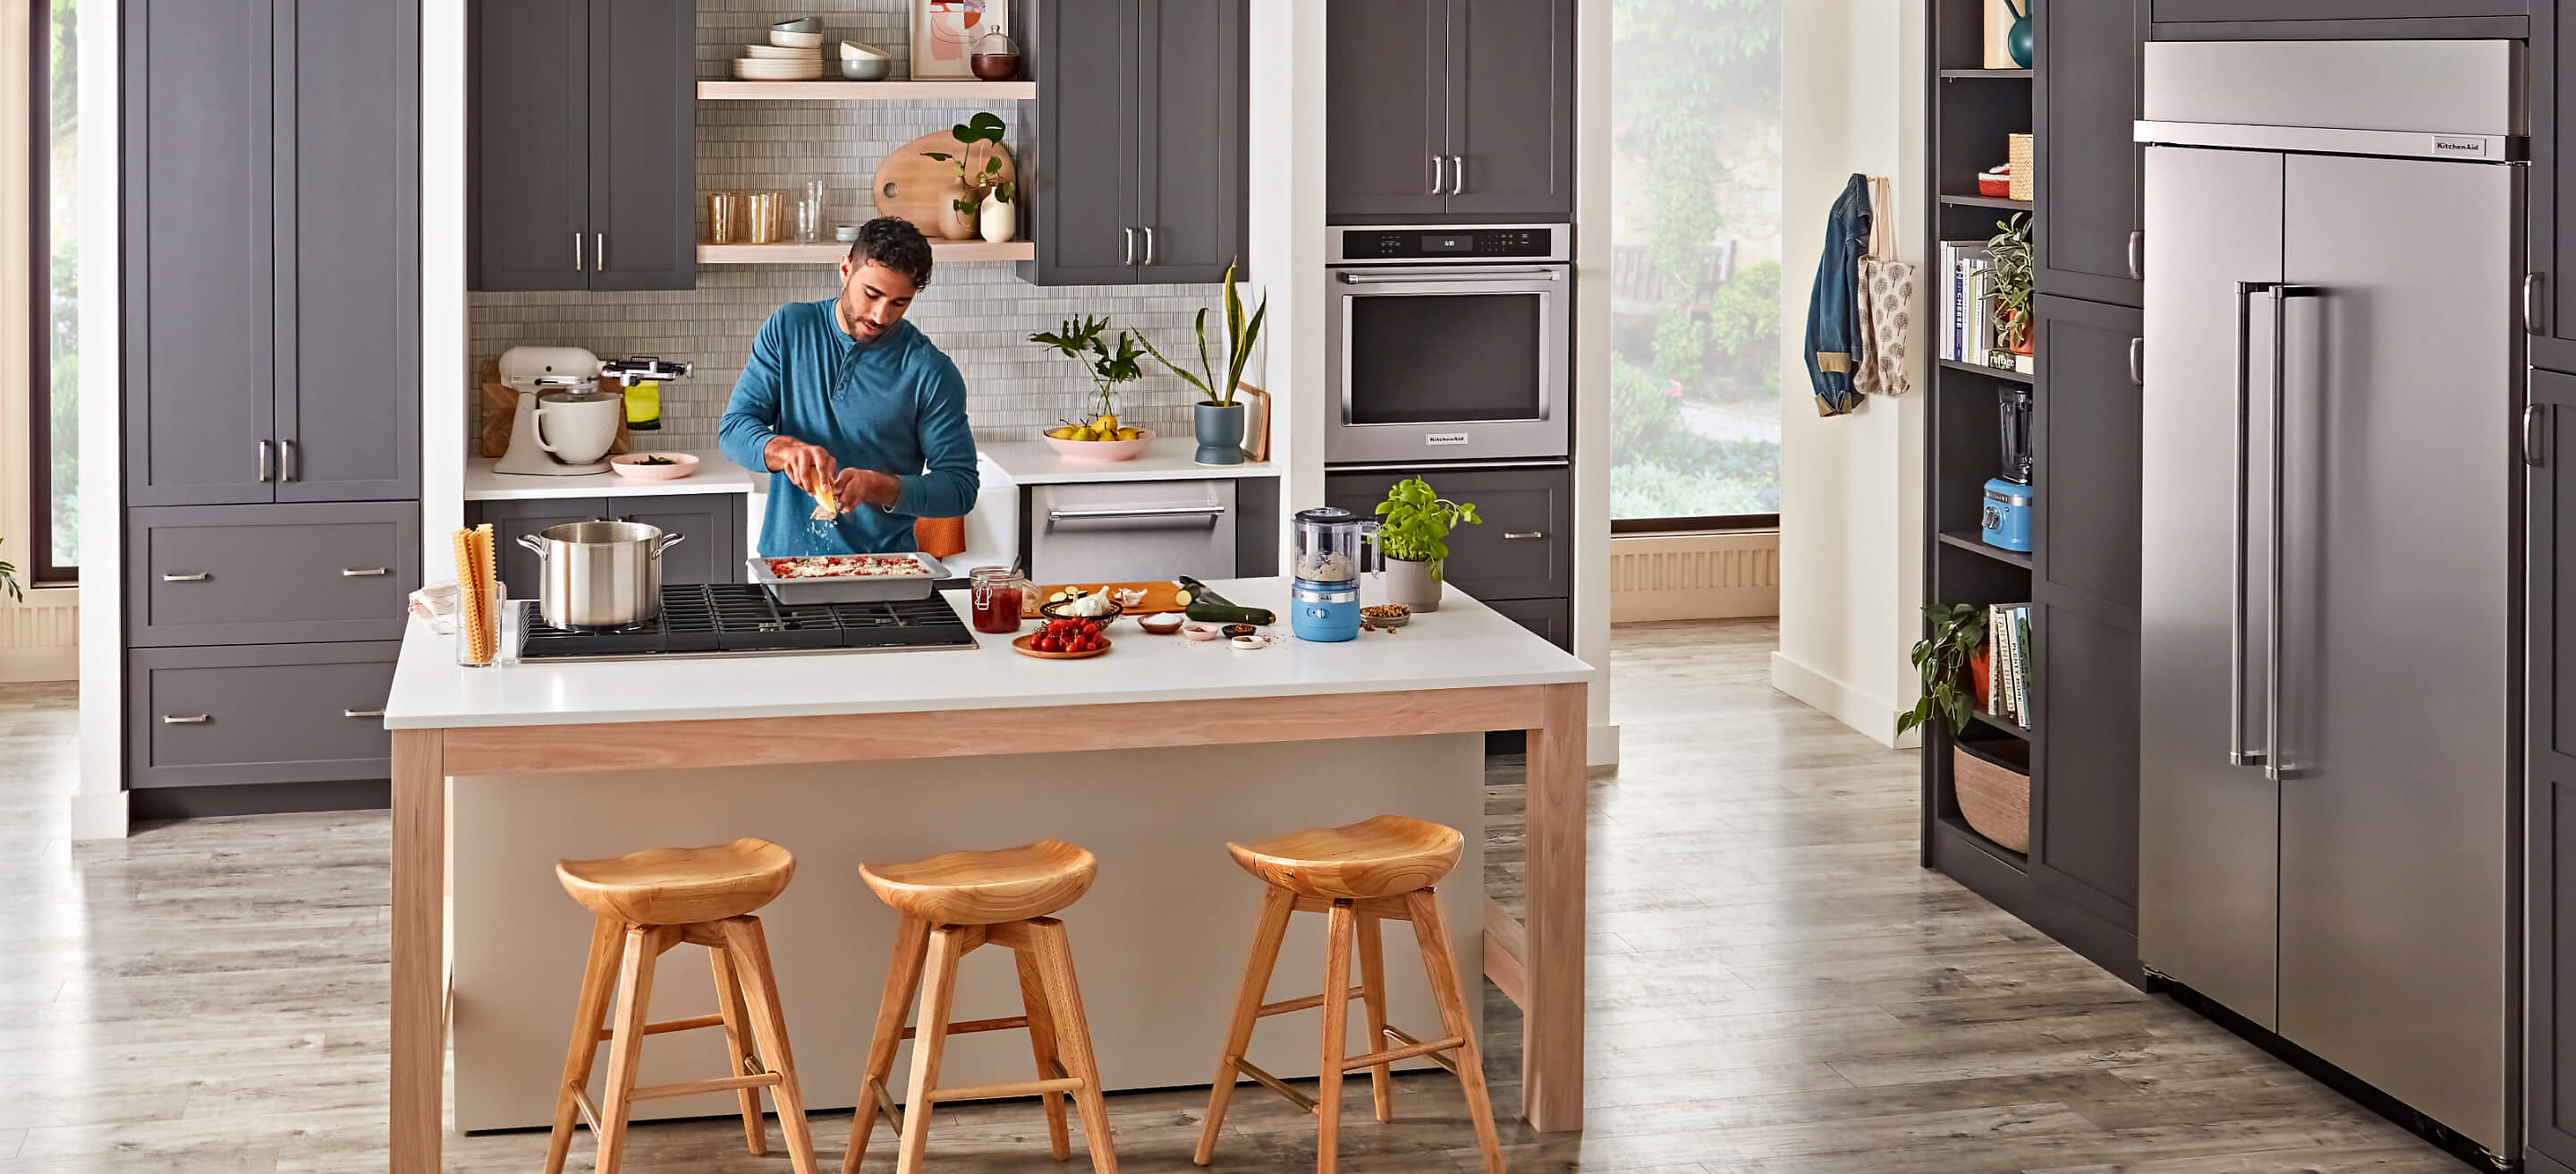 A person cooking on a cooktop in a stylish kitchen surrounded by KitchenAid® appliances. 